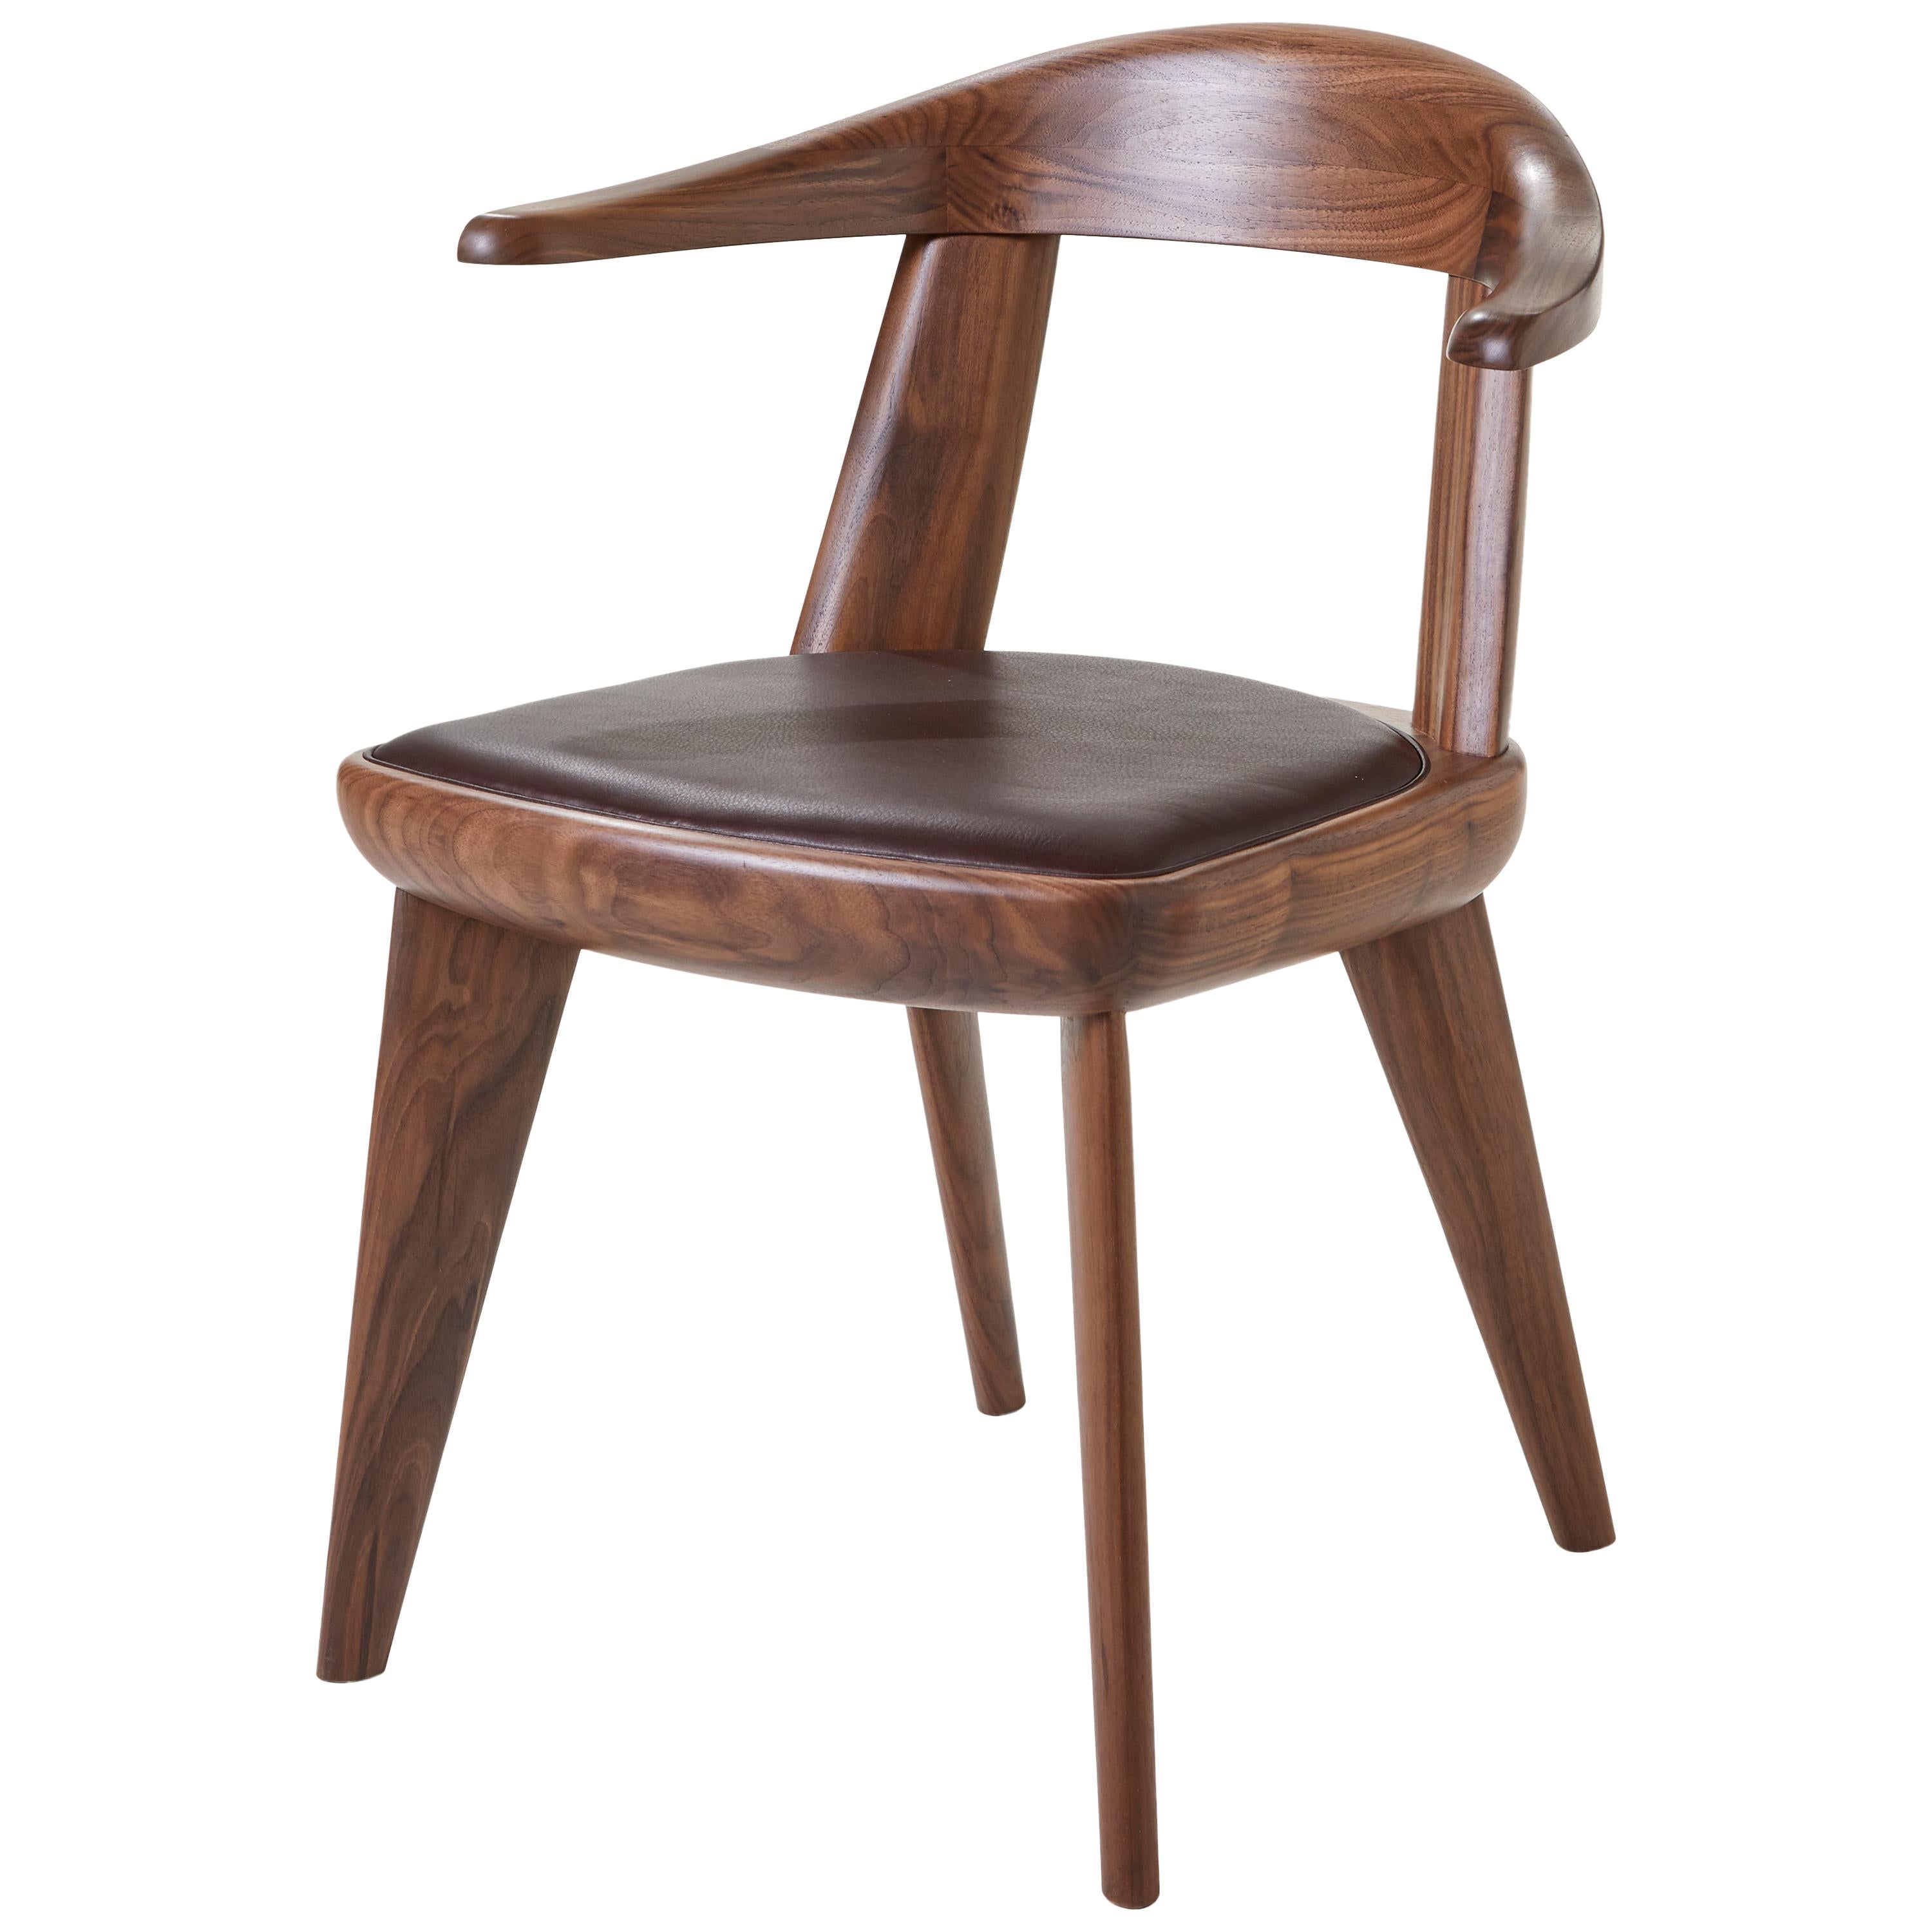 For Sale: Brown (Elegant 93957 Dark Brown) Brutus Armchair in Solid Walnut with Leather Seat Designed by Craig Bassam